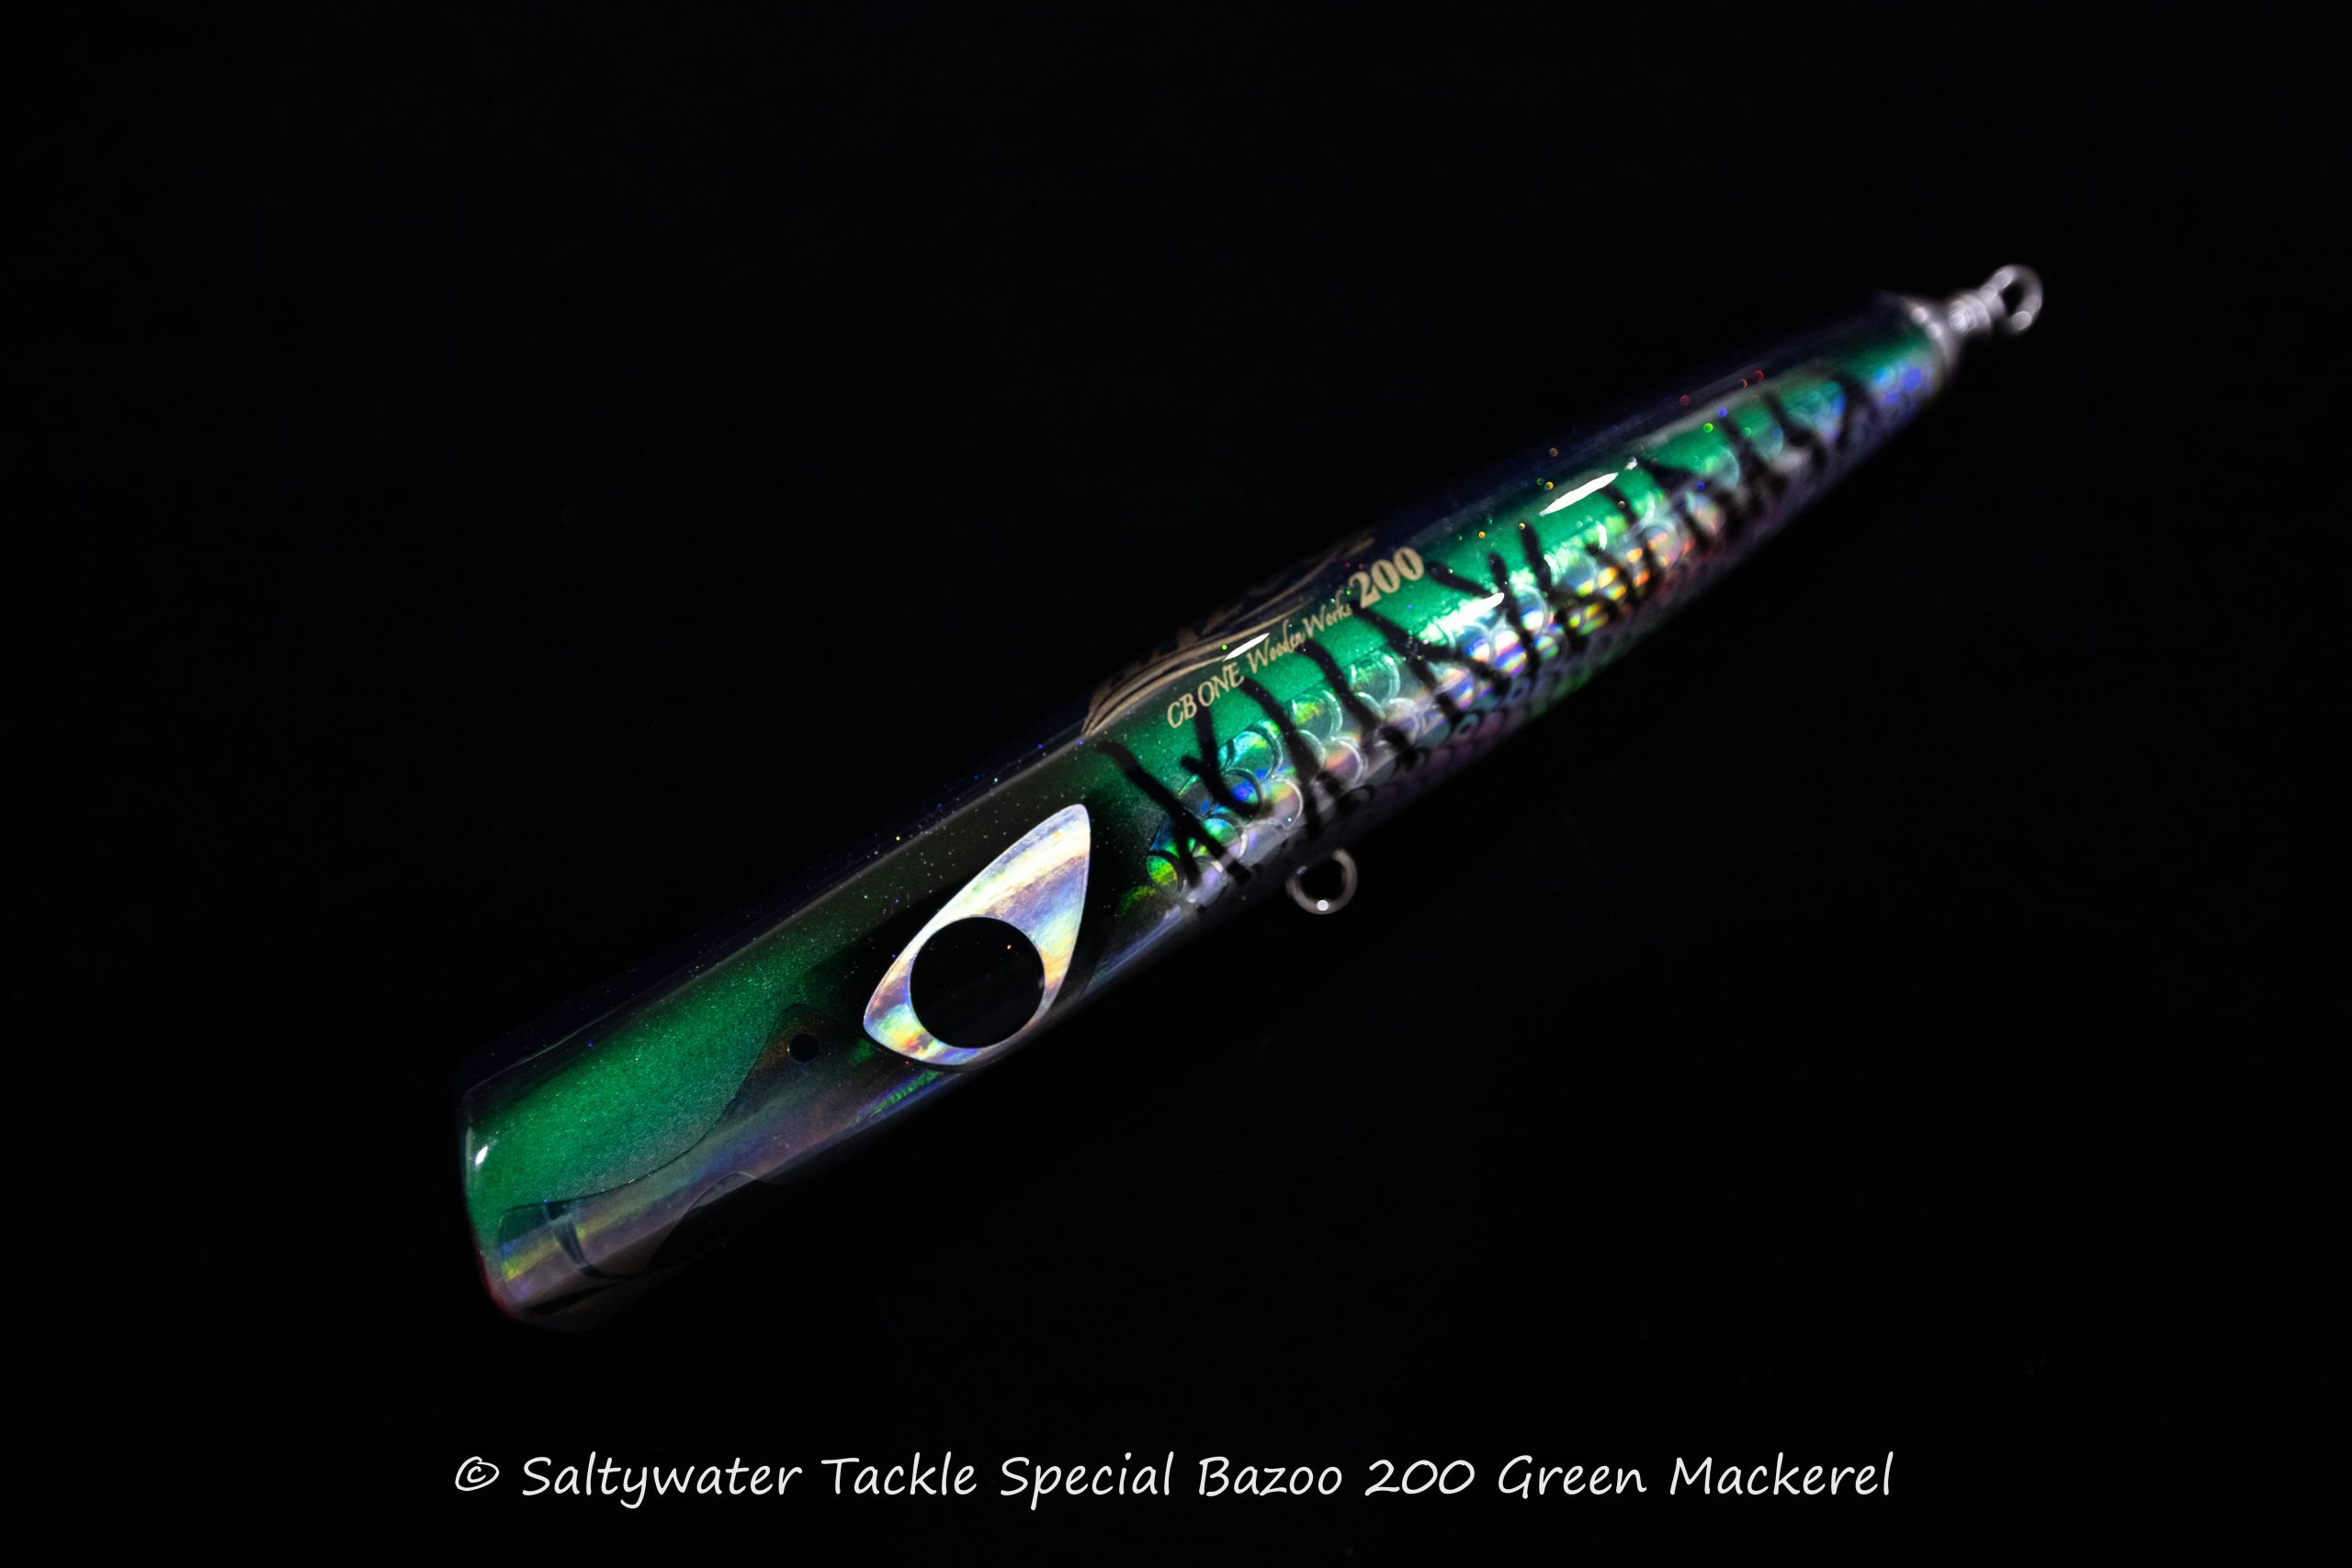 CB One Bazoo 200 Saltywater Tackle Special